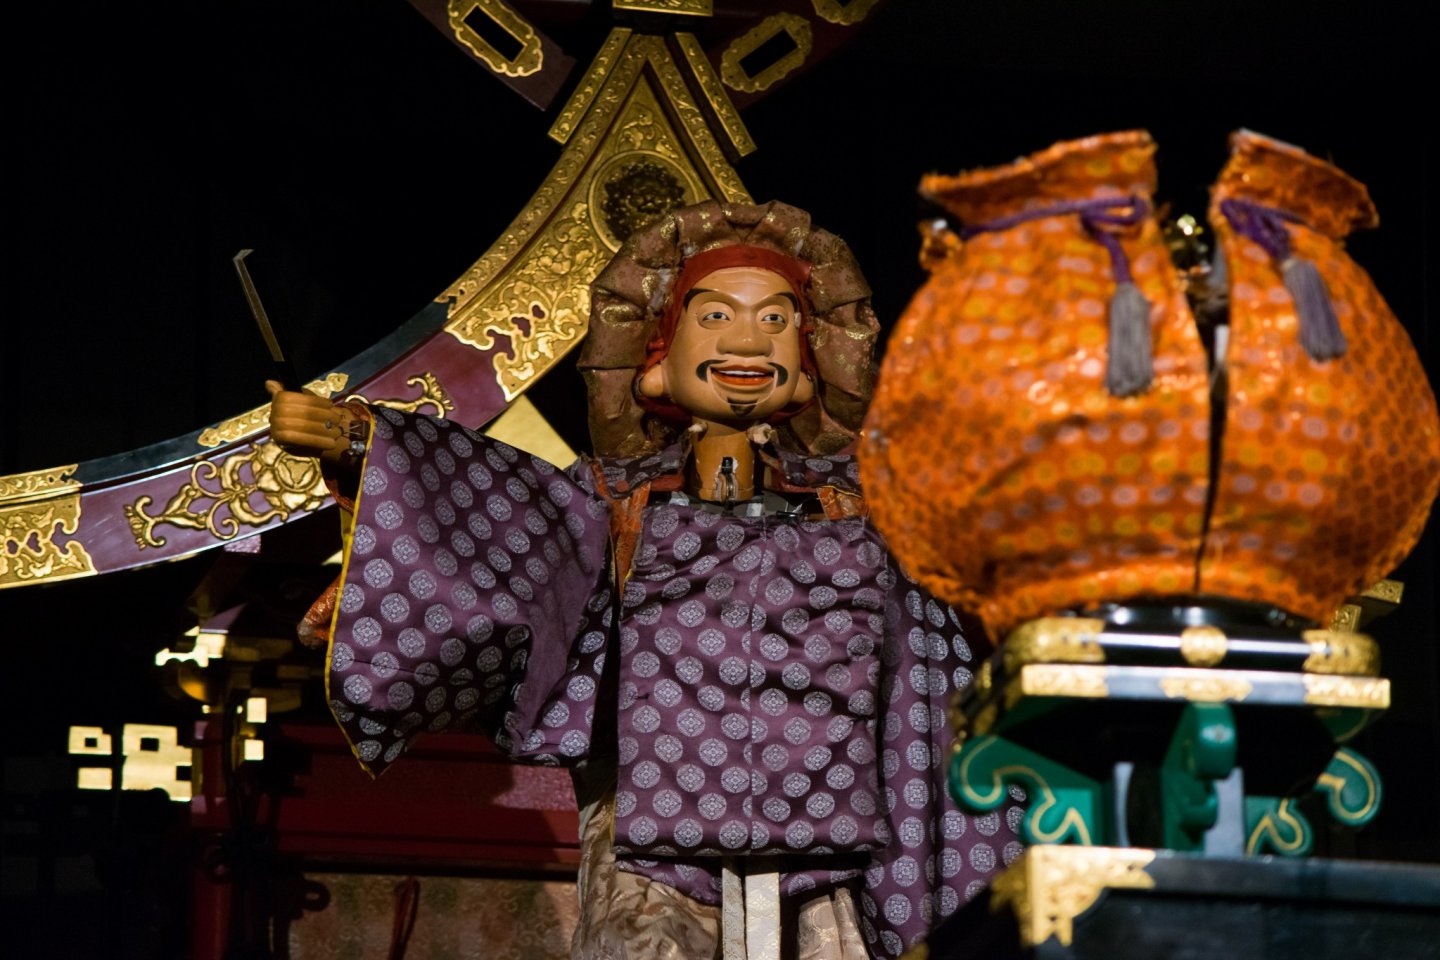 A marionette in action at the Karakuri Museum.